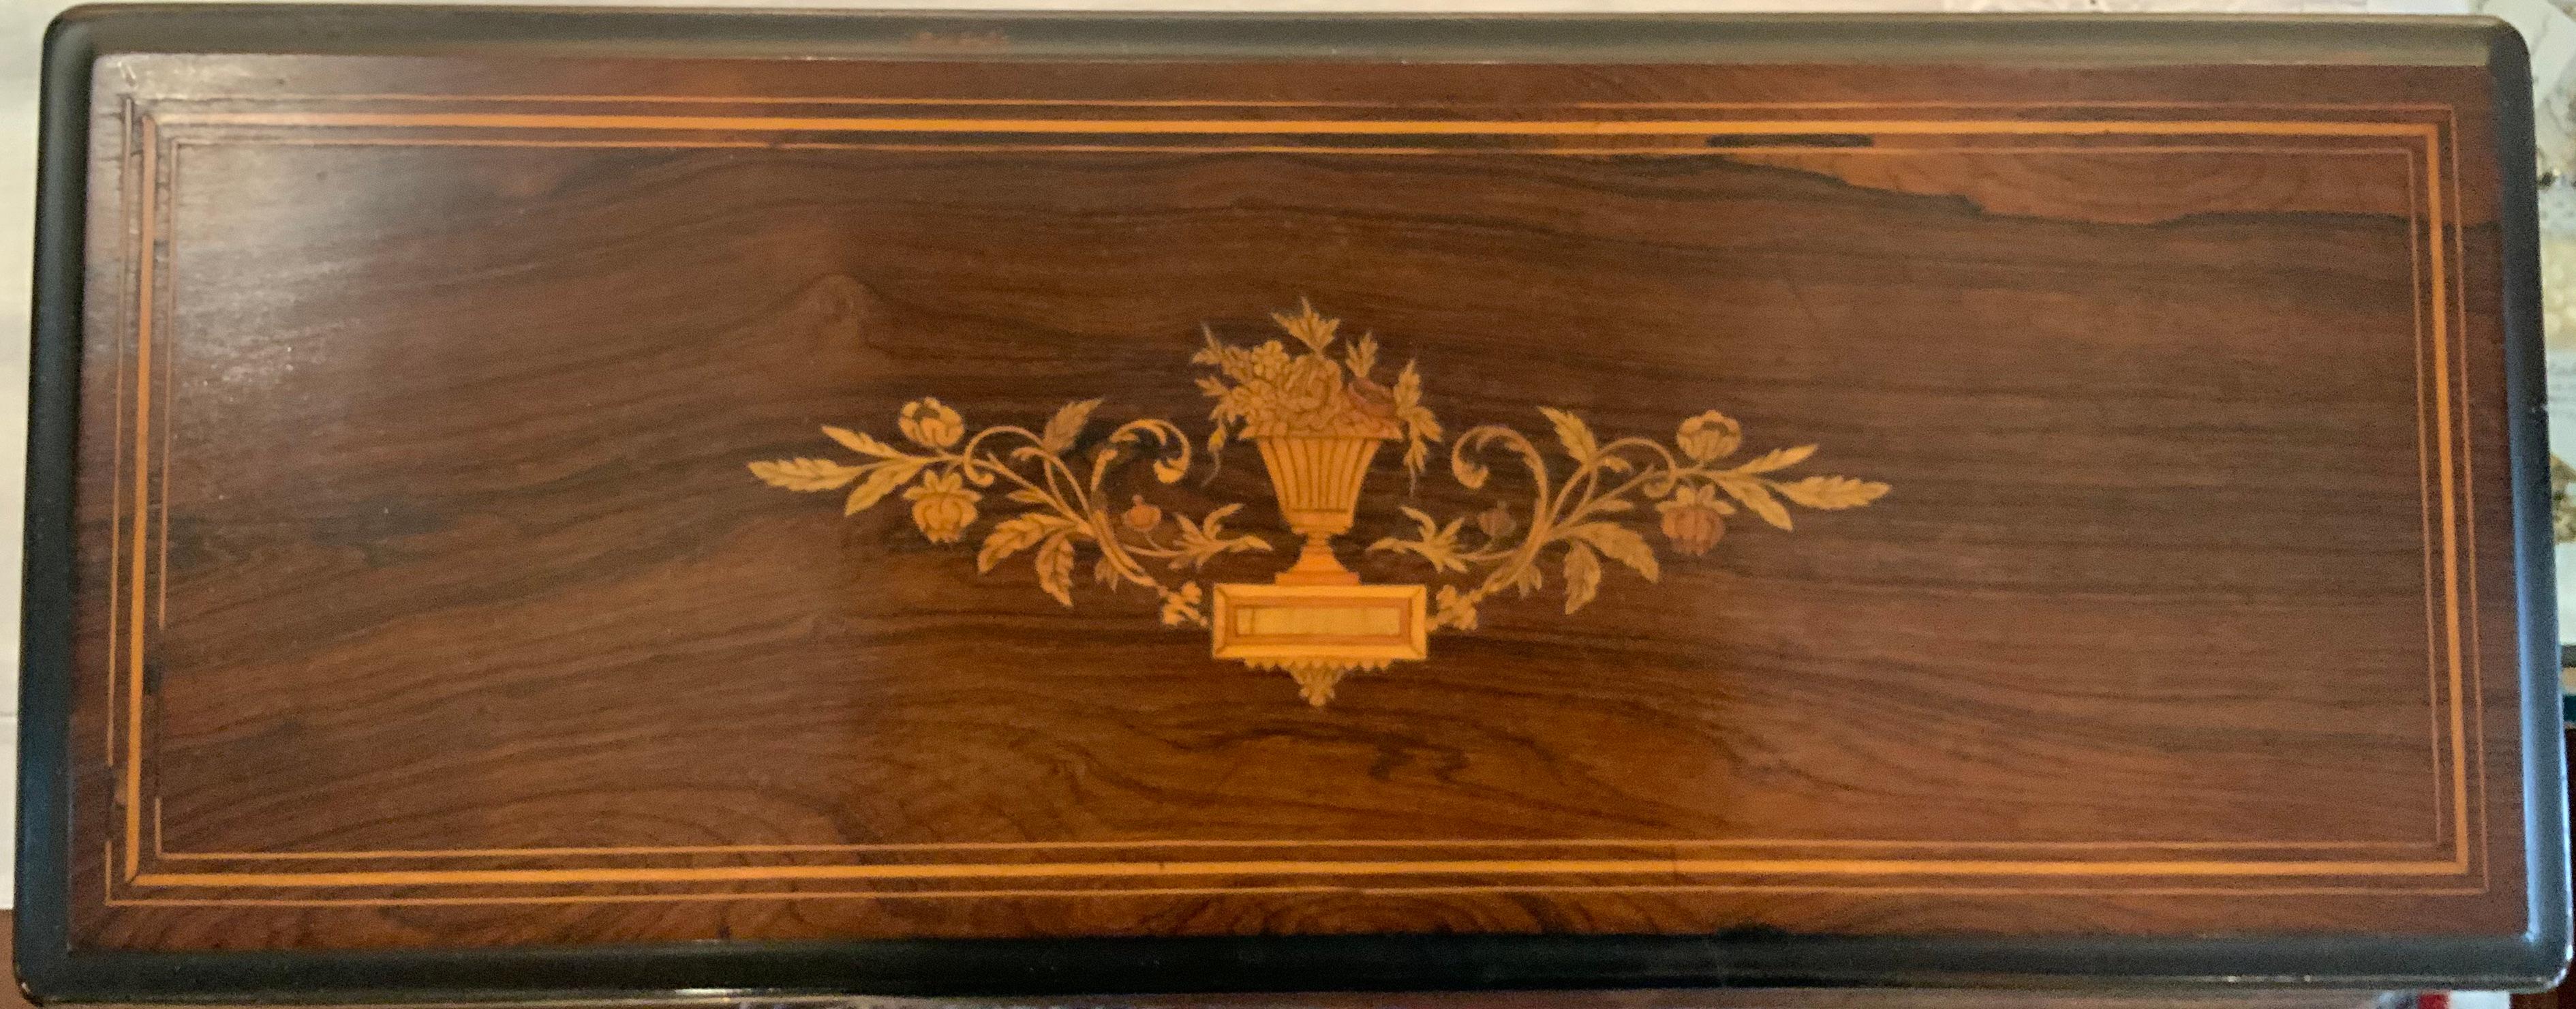 Large Swiss music wood case with details of floral vase marquetry and a string inlaid in the top of the lid. This one has in the back the original tune sheet listing. It has a single cylinder playing eight airs. Inside the wood case there is a